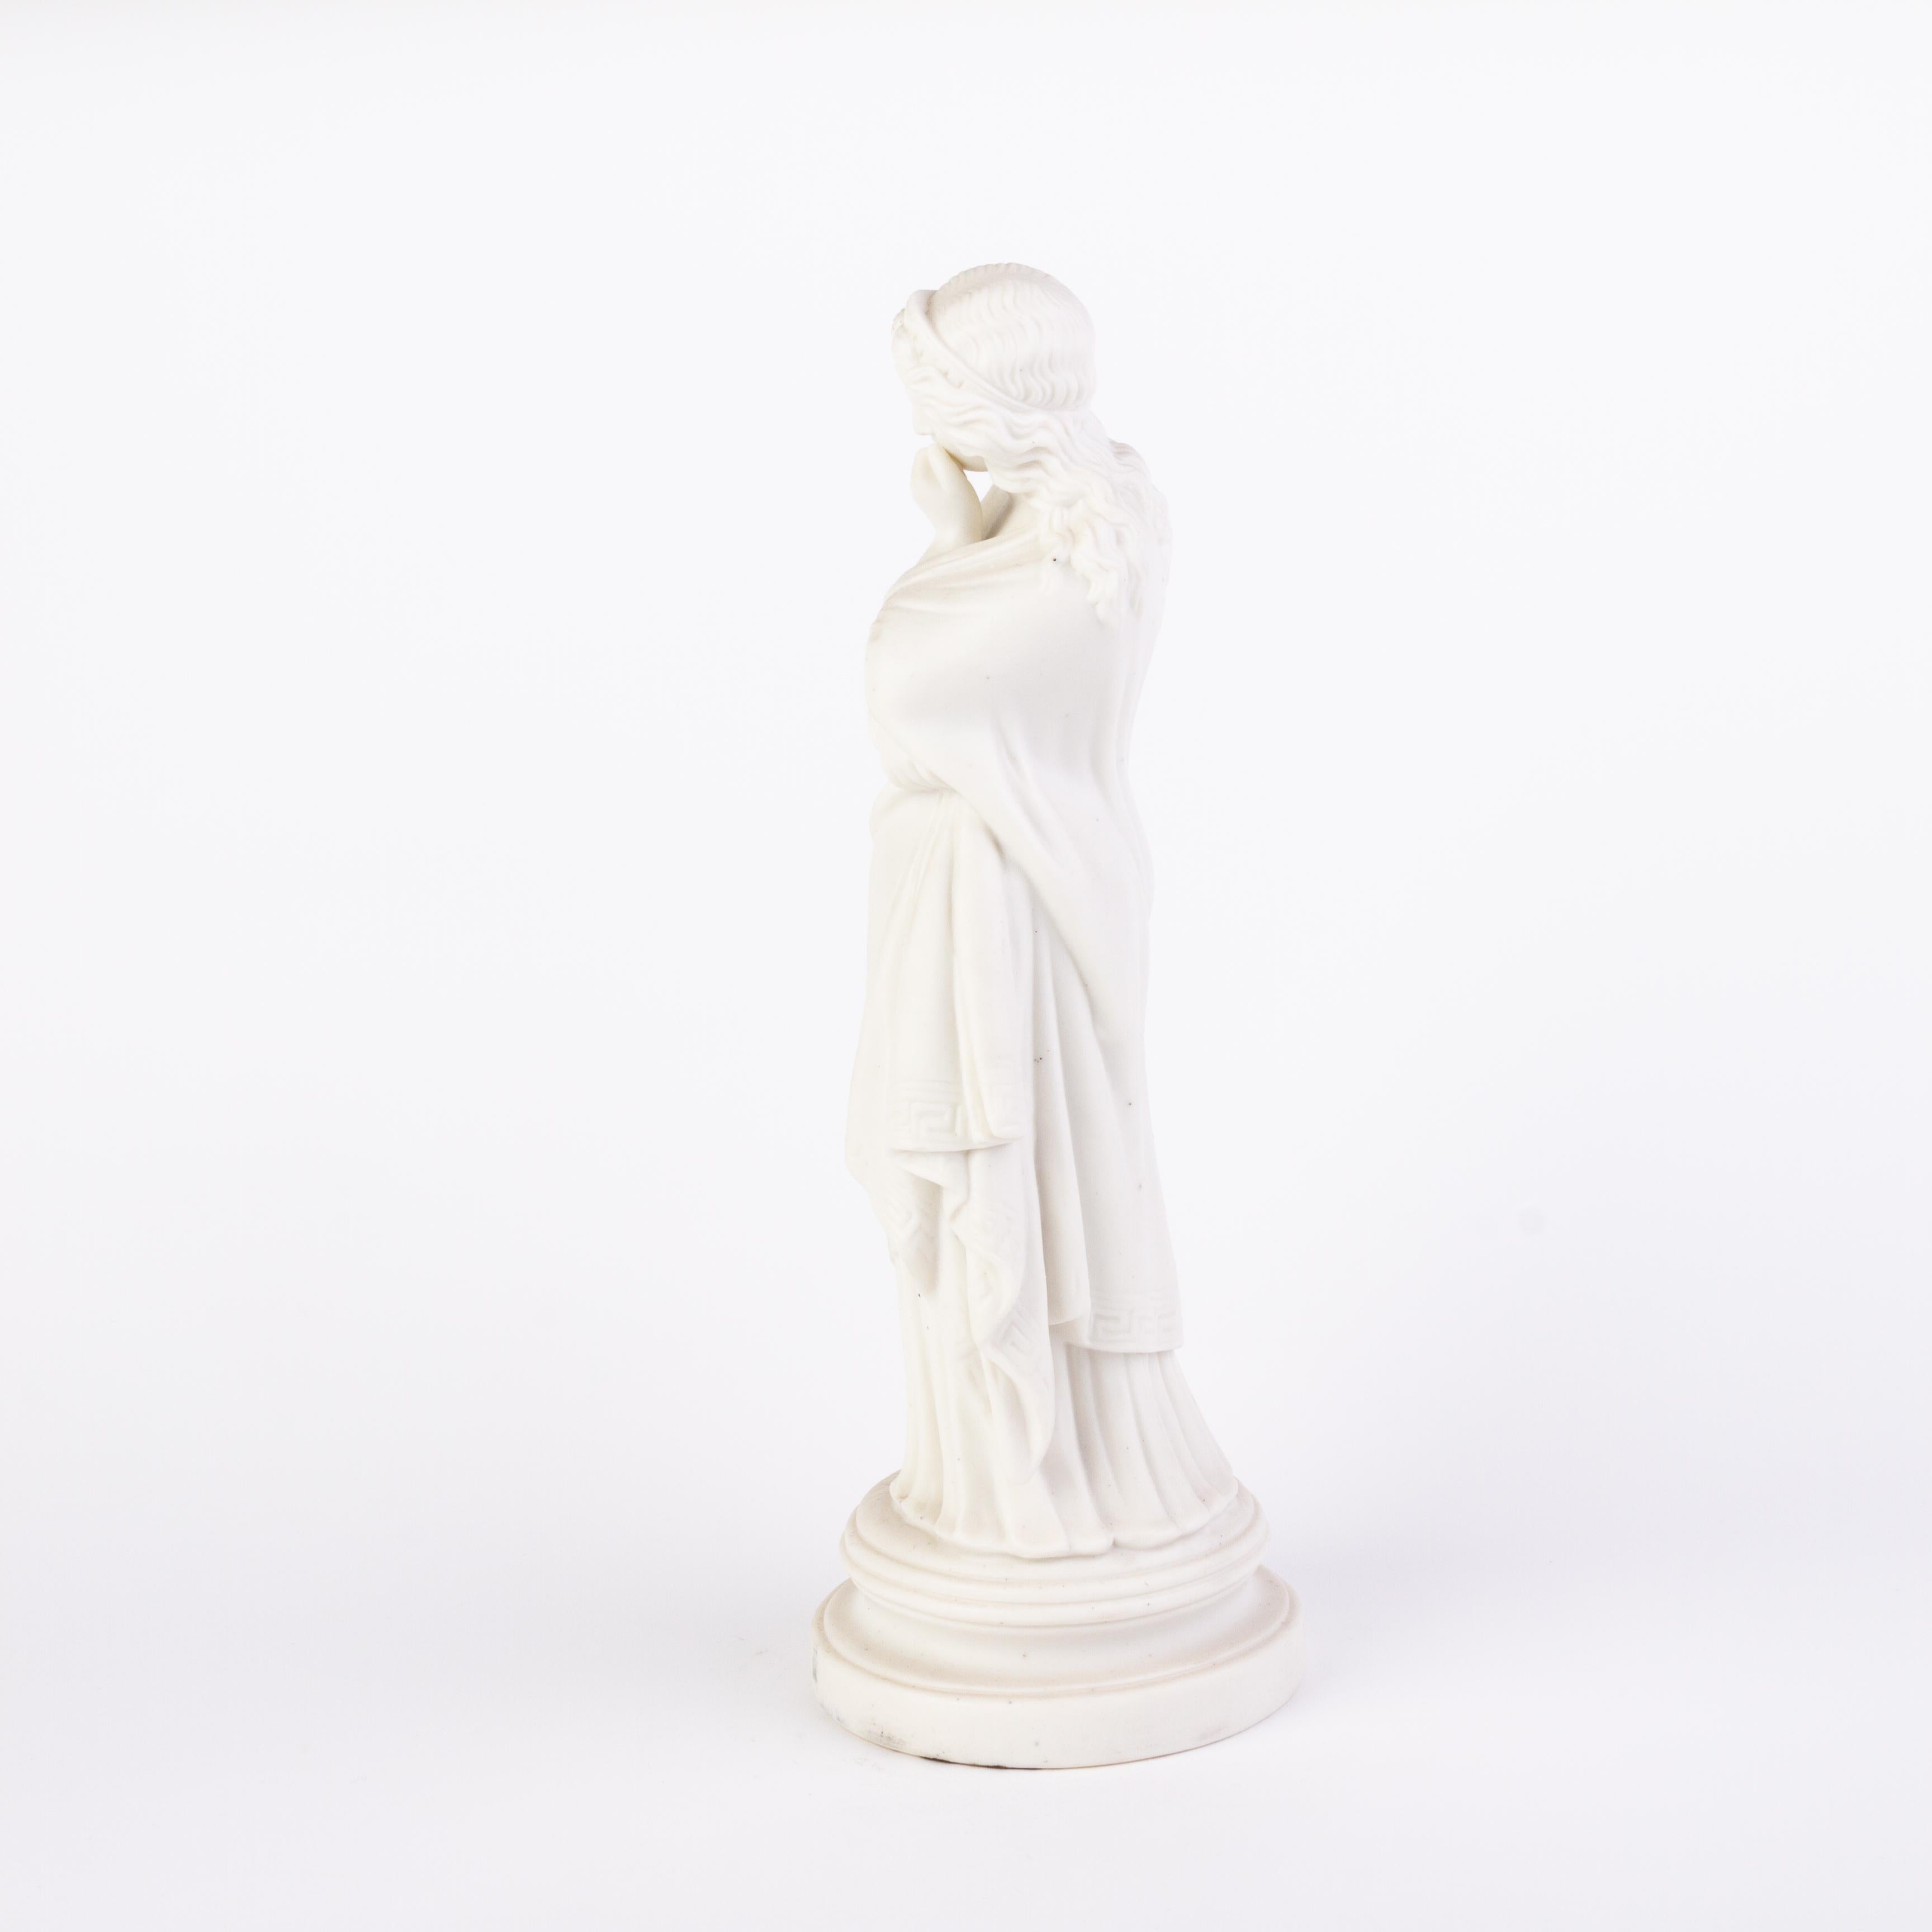 Porcelain English Victorian Copeland Parian Ware Statue Muse of Comedy 19th Century For Sale